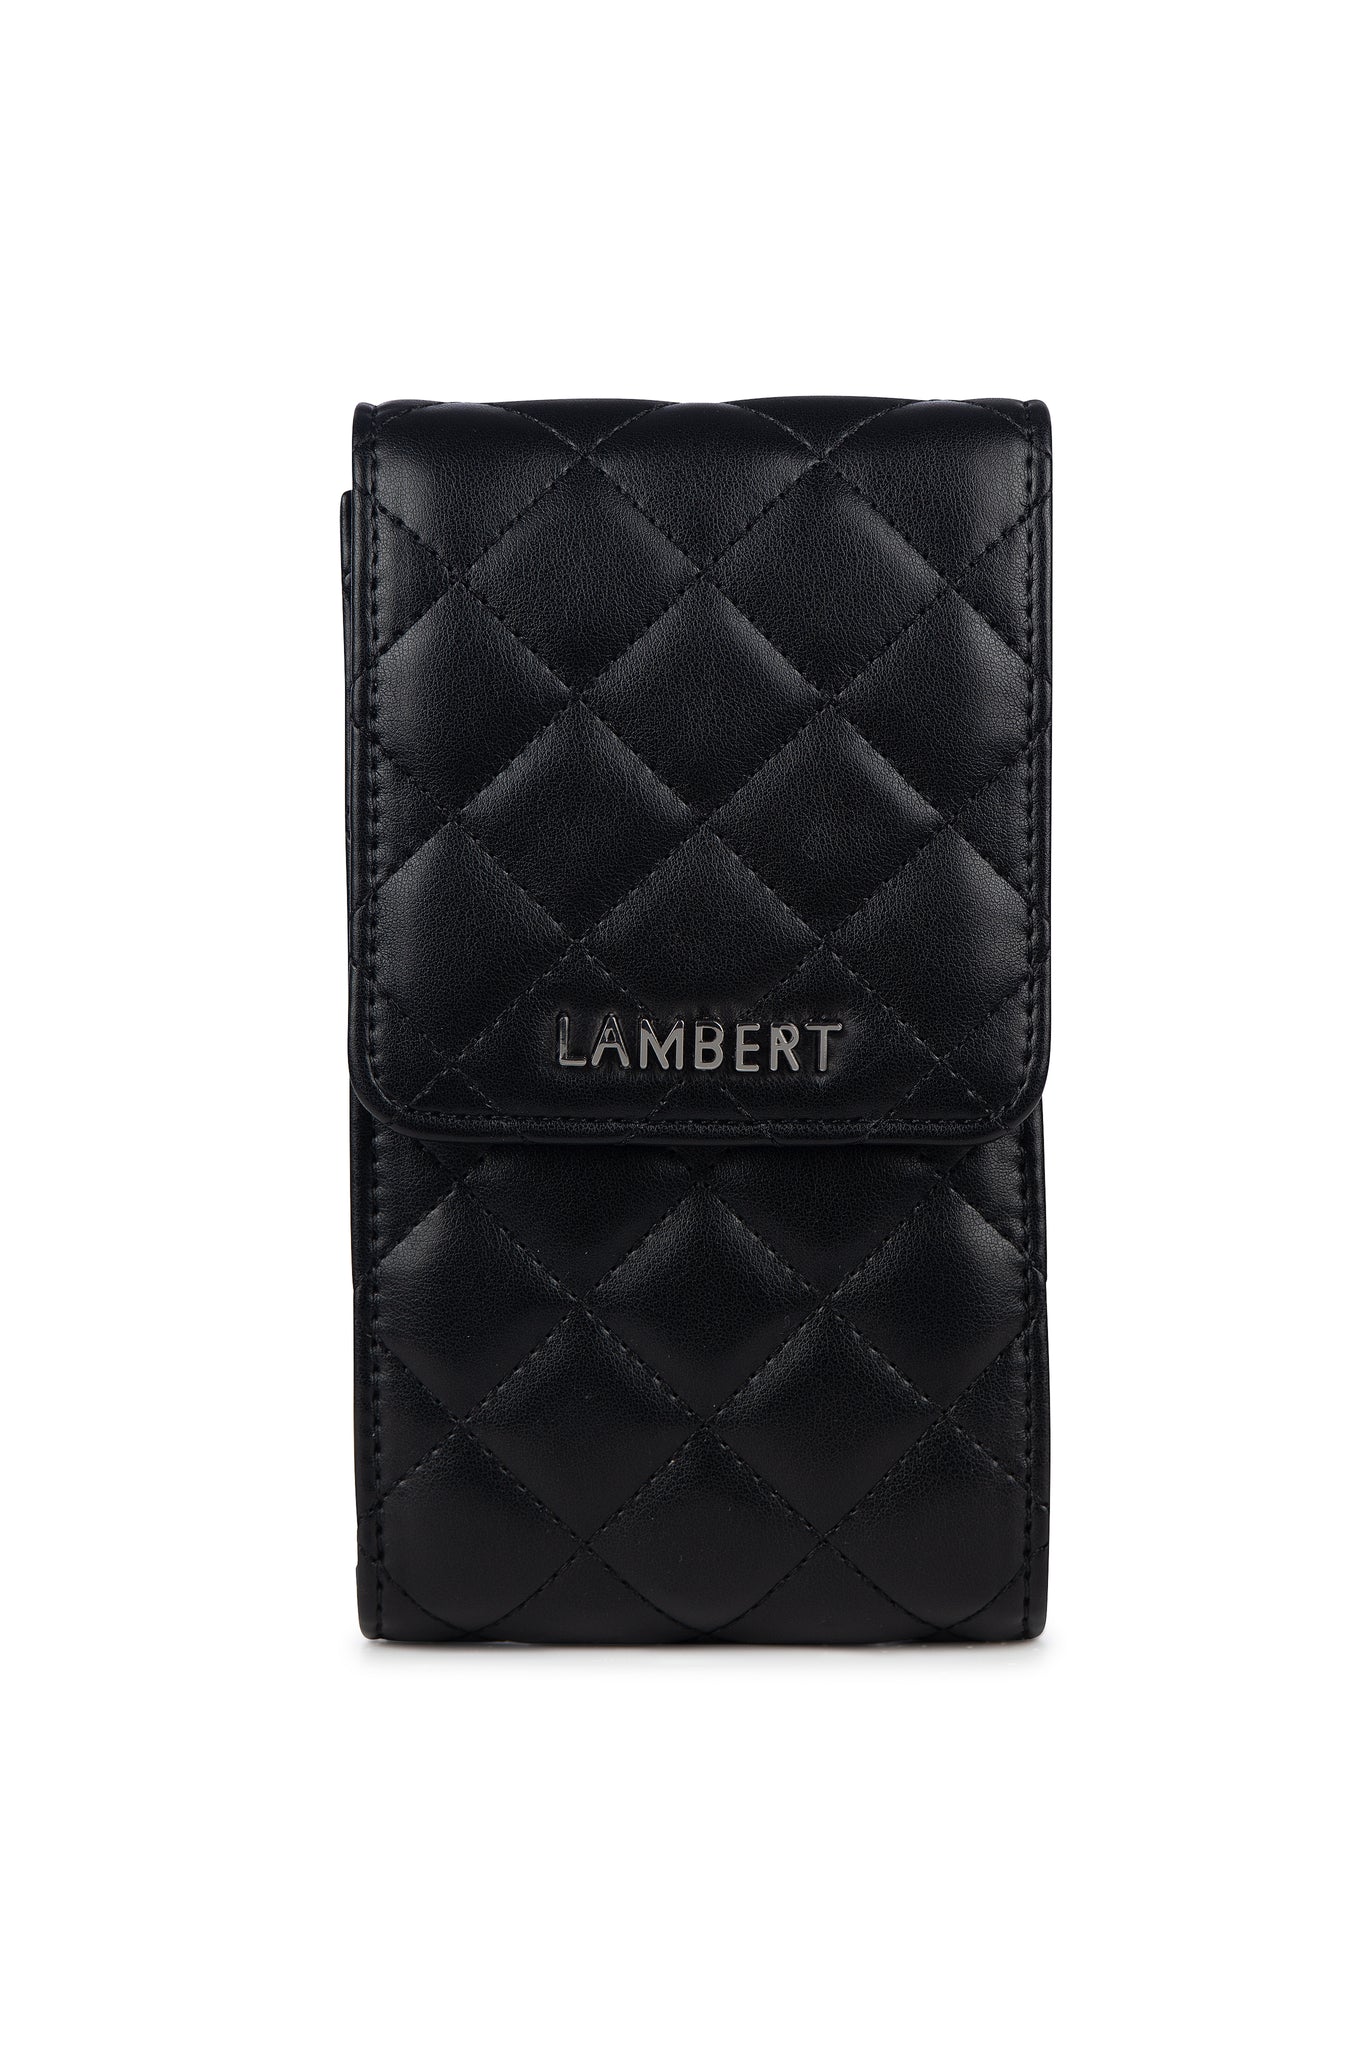 Lambert - The Delilah Quilted Phone Crossbody - all things being eco chilliwack - Canadian designed vegan wallets and purses